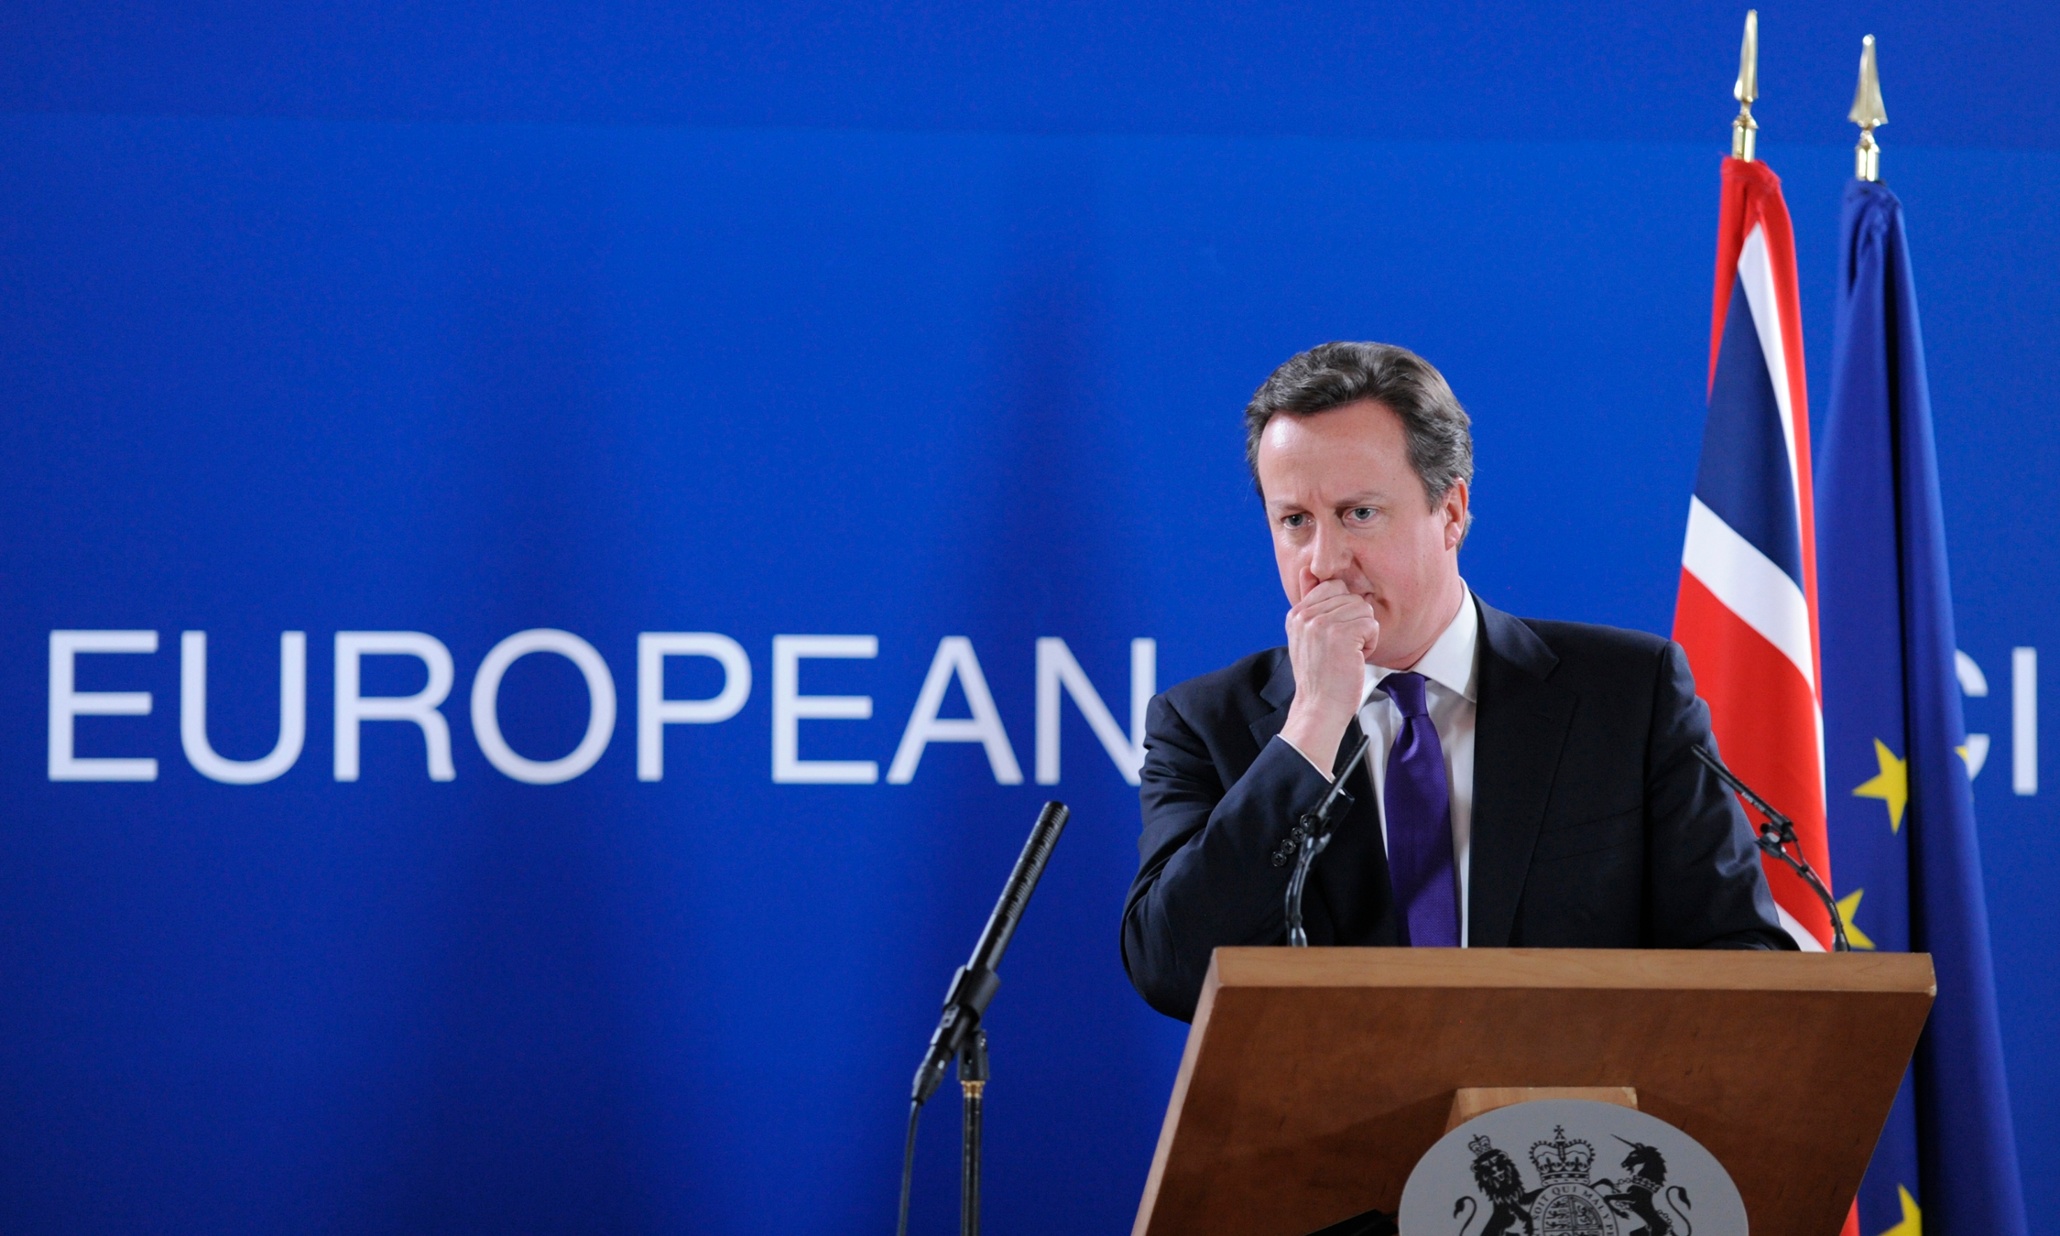 British Prime Minister David Cameron speaks at a press conference at the EU Headquarters on February 8, 2013 in Brussels, on the last day of a two-day European Union leaders summit. After 24 hours of talks lasting through the night, European Union leaders finally clinched a deal on the bloc's next 2014-2020 budget, summit chair and EU president Herman Van Rompuy said Friday. AFP PHOTO / JOHN THYS (Photo credit should read JOHN THYS/AFP/Getty Images)